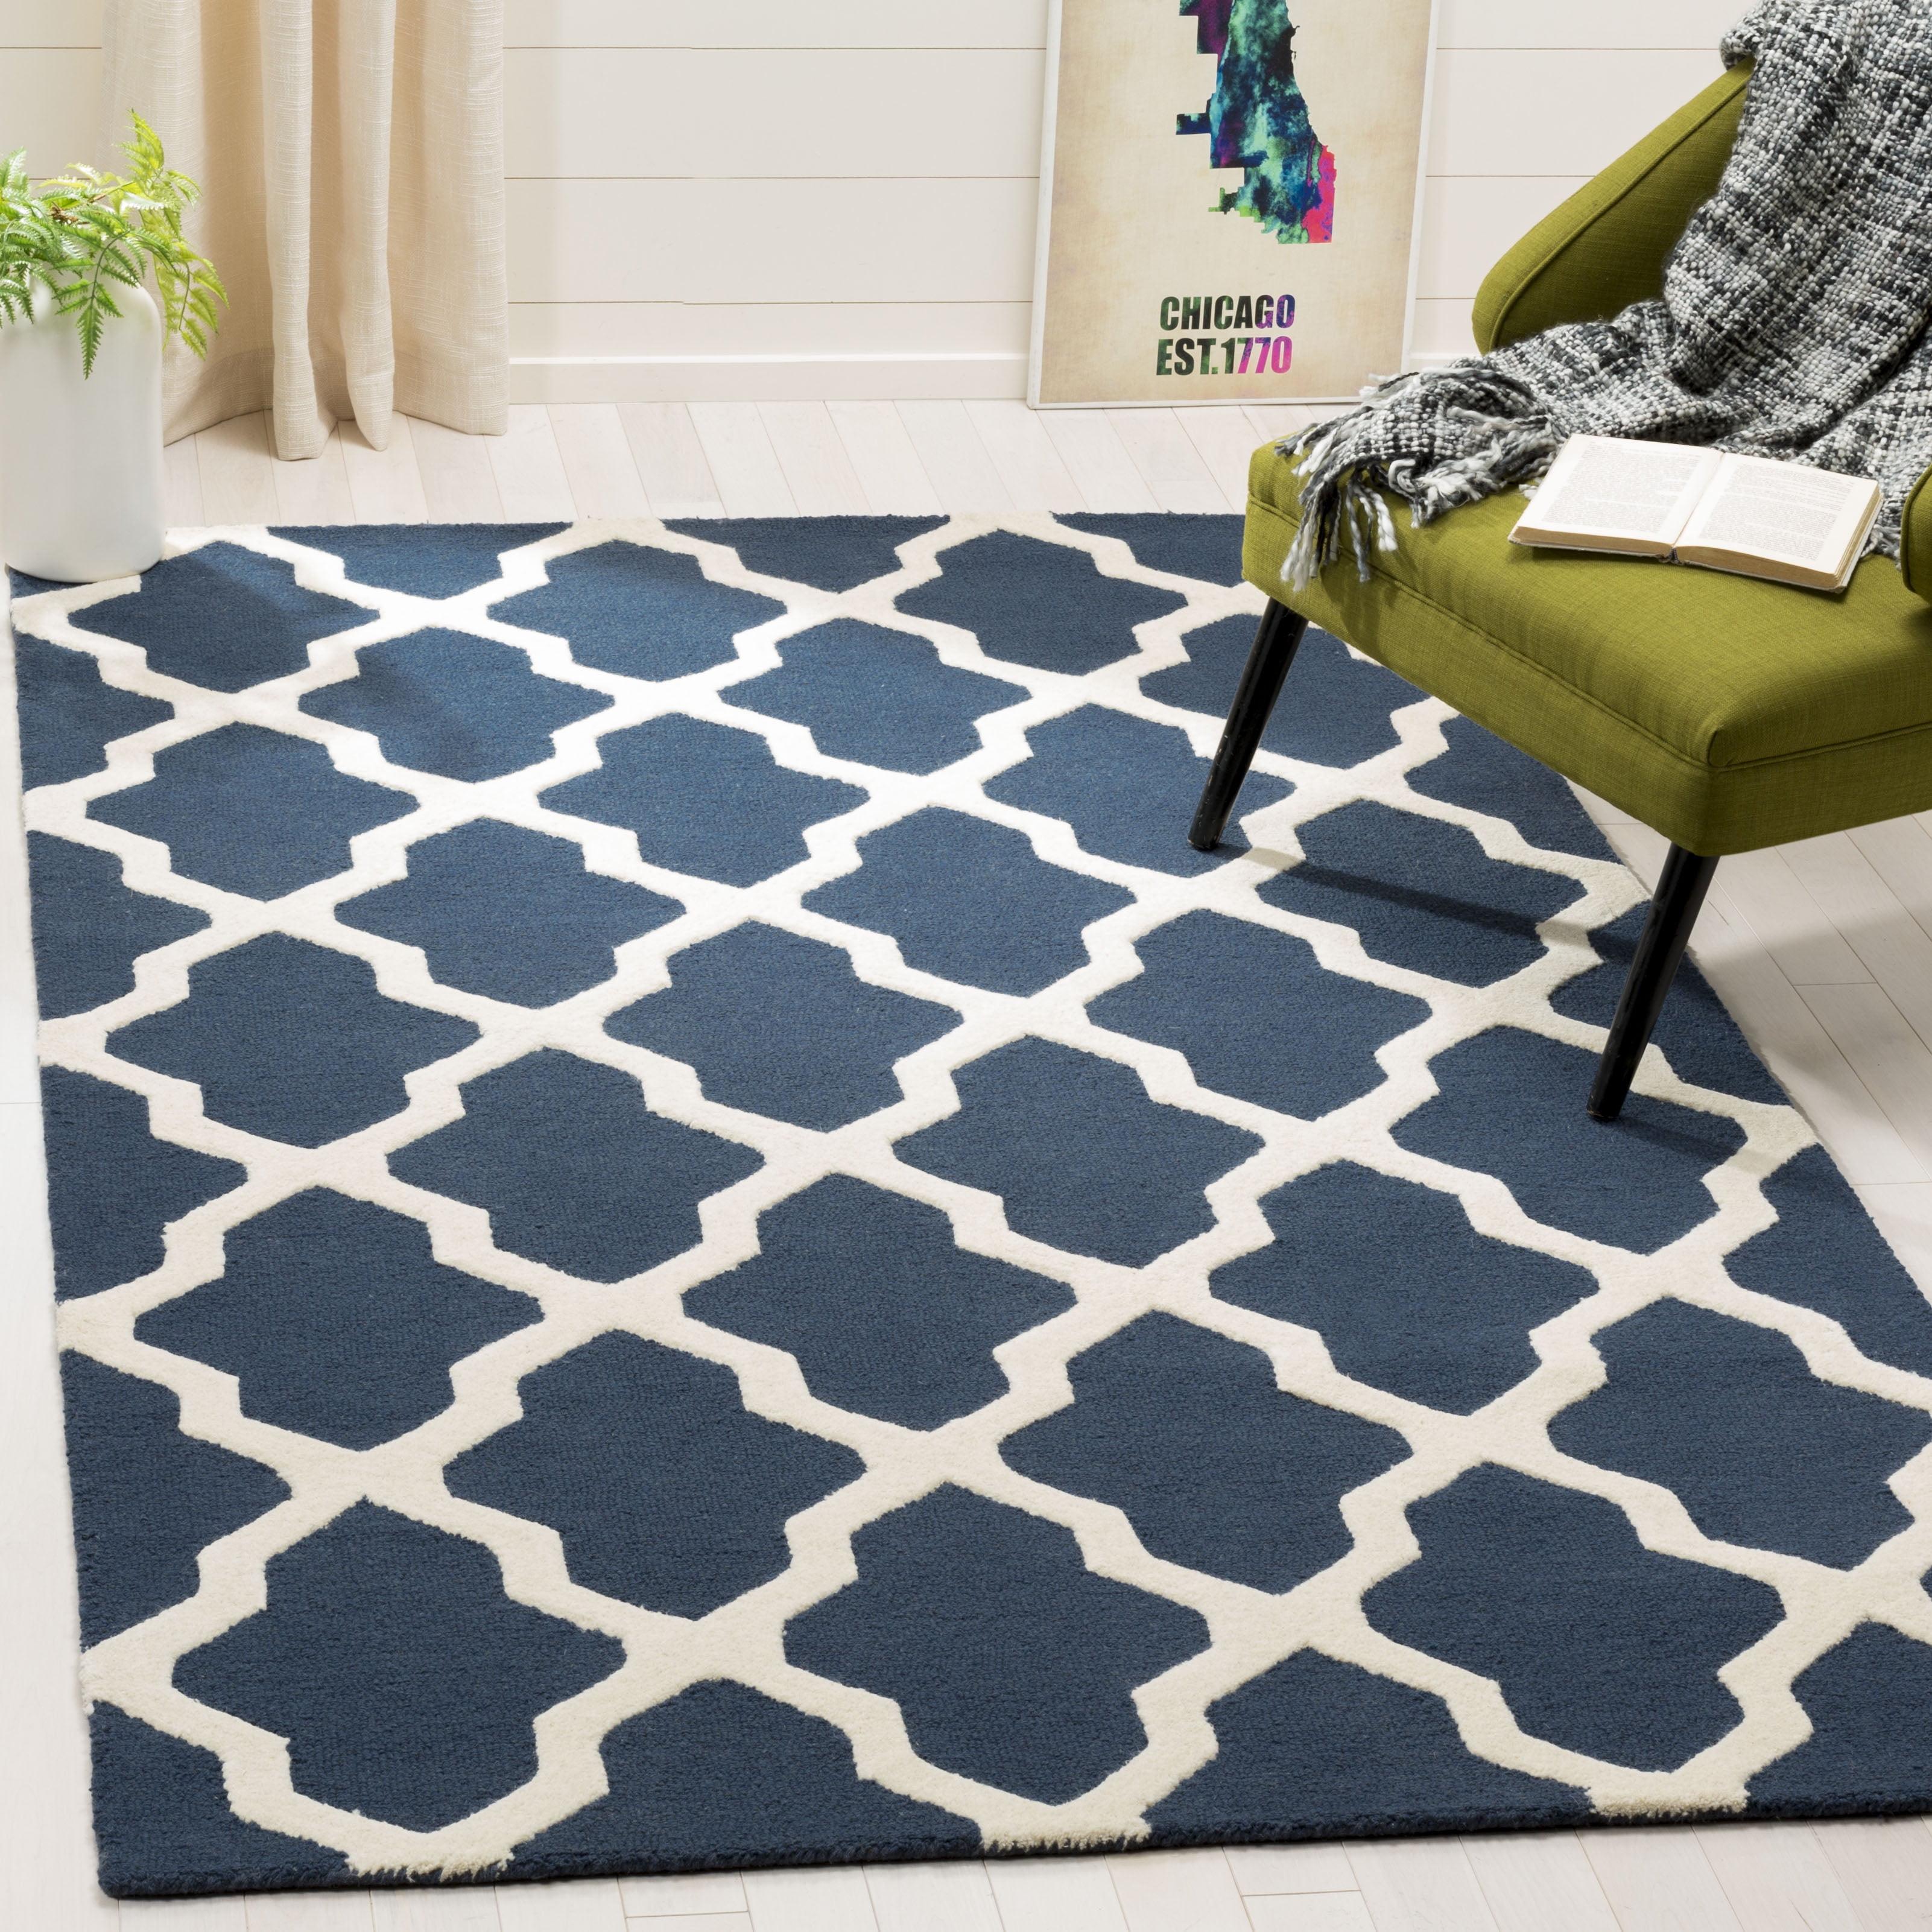 Navy Blue and Ivory Hand-Tufted Wool Area Rug, 5' x 8'